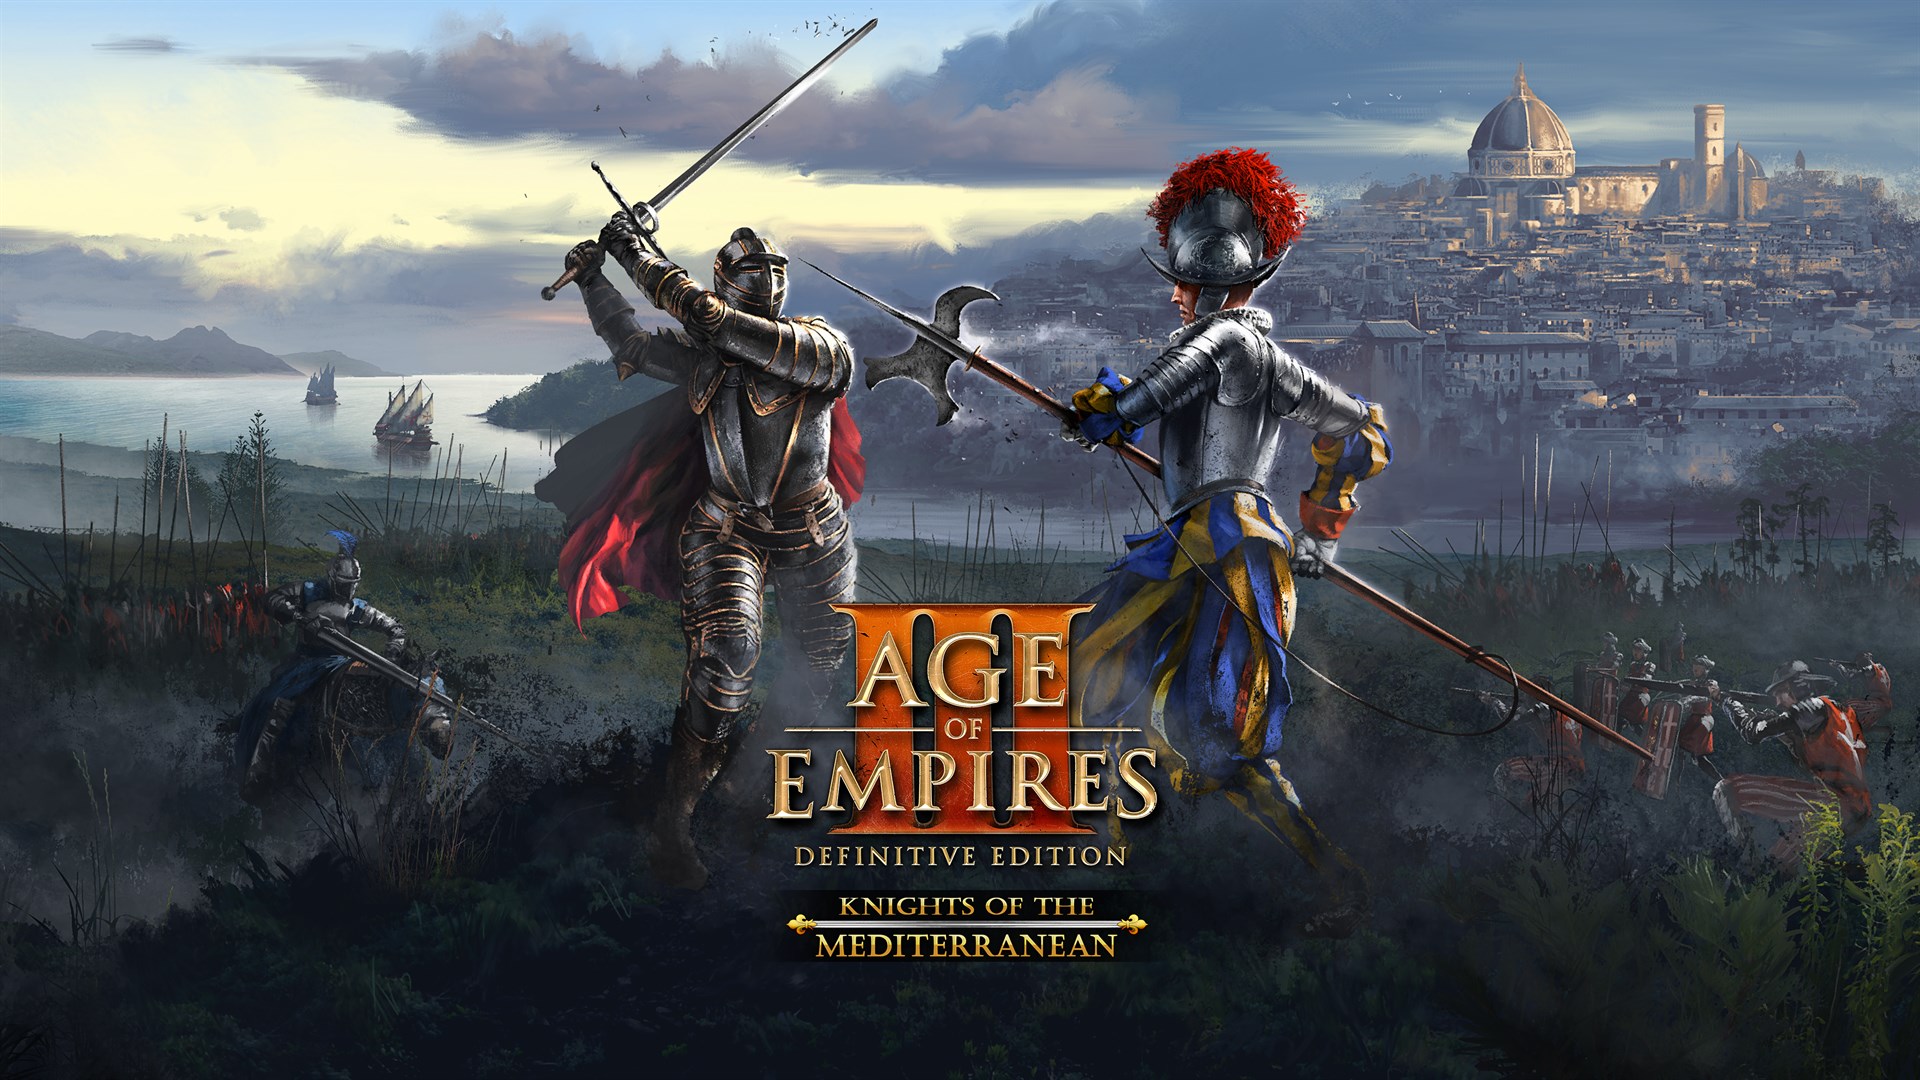 Age Of Empires Iii Definitive Edition Knights Of The Mediterranean Age Of Empires Series Wiki Fandom